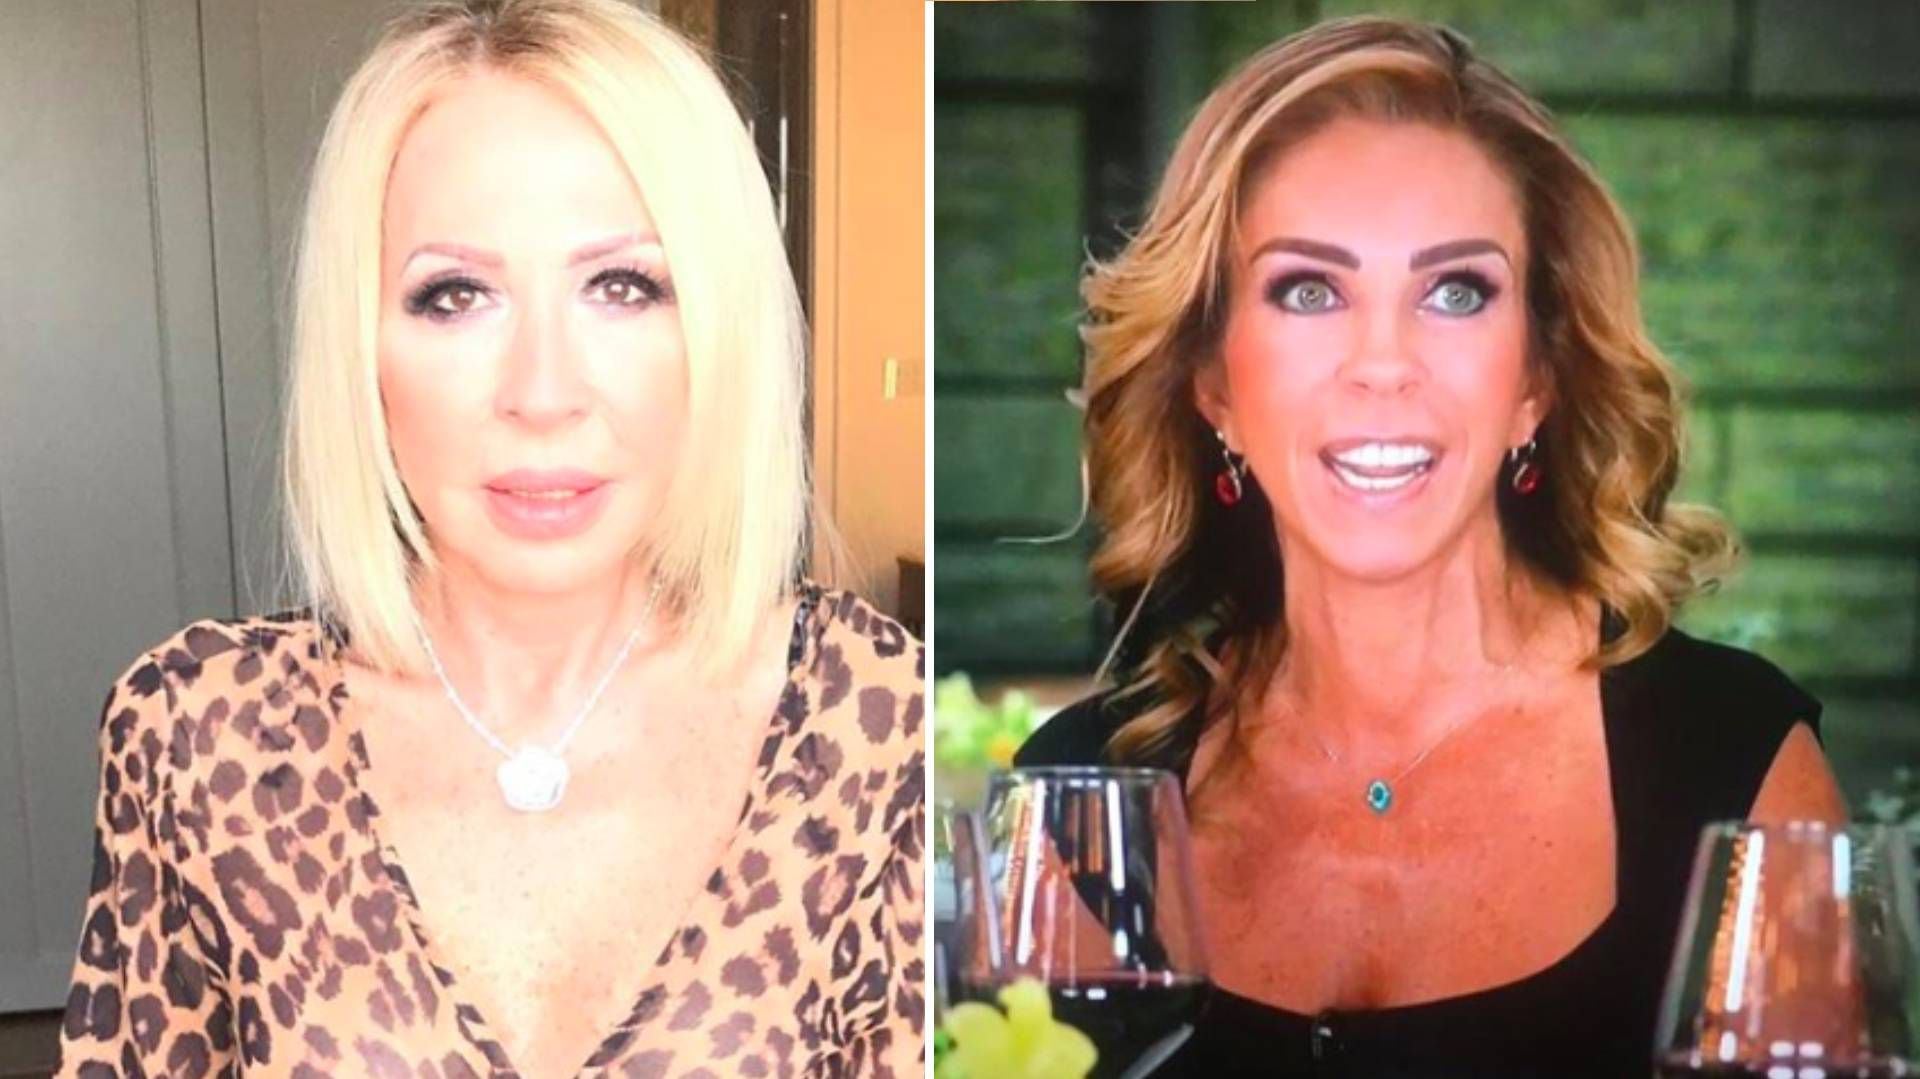 Laura Bozzo joins The House of Celebrities